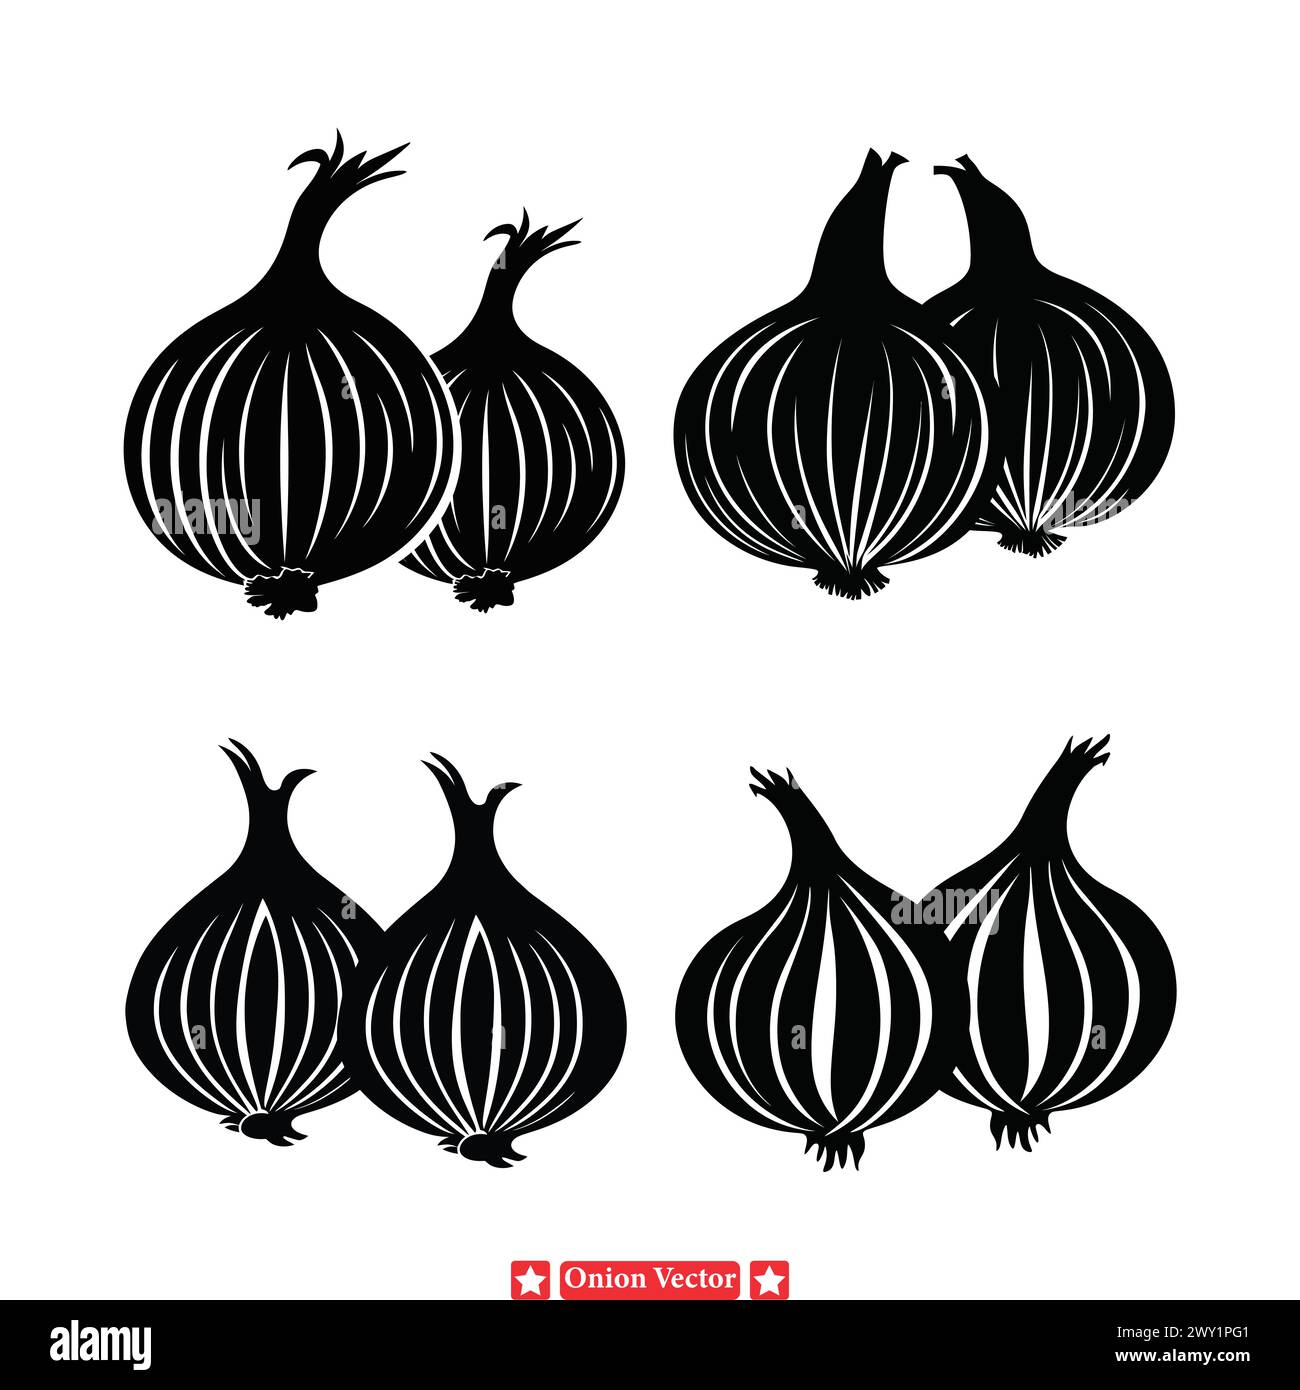 Fresh Onion Vector Designs  Crisp Graphics for Cooking Magazines, Food Packaging, and Culinary Events Promotions Stock Vector